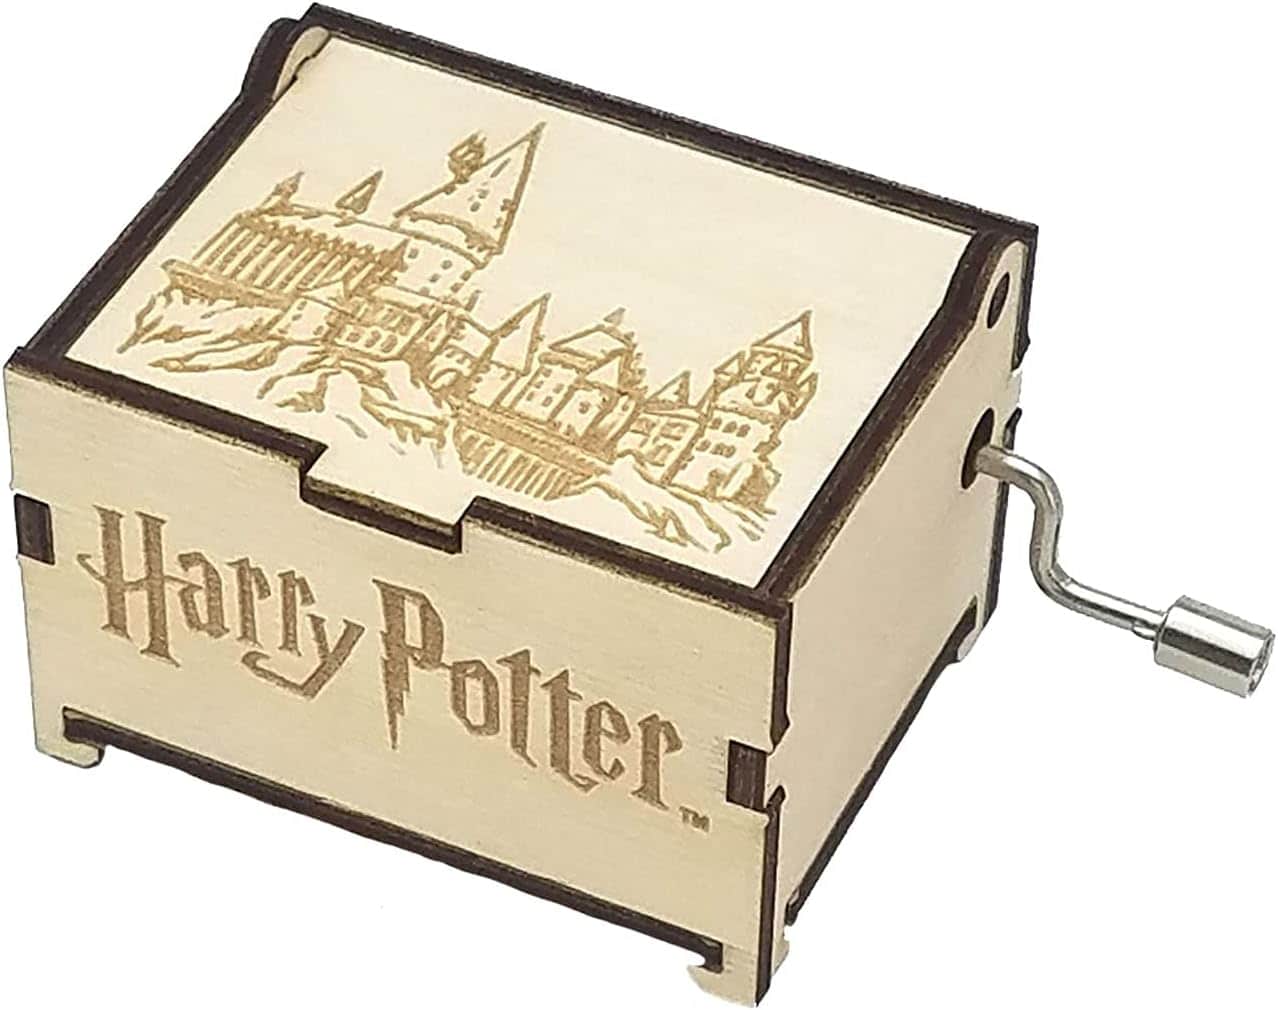 The Best Harry Potter Gifts For Potterheads! - woodgeekstore